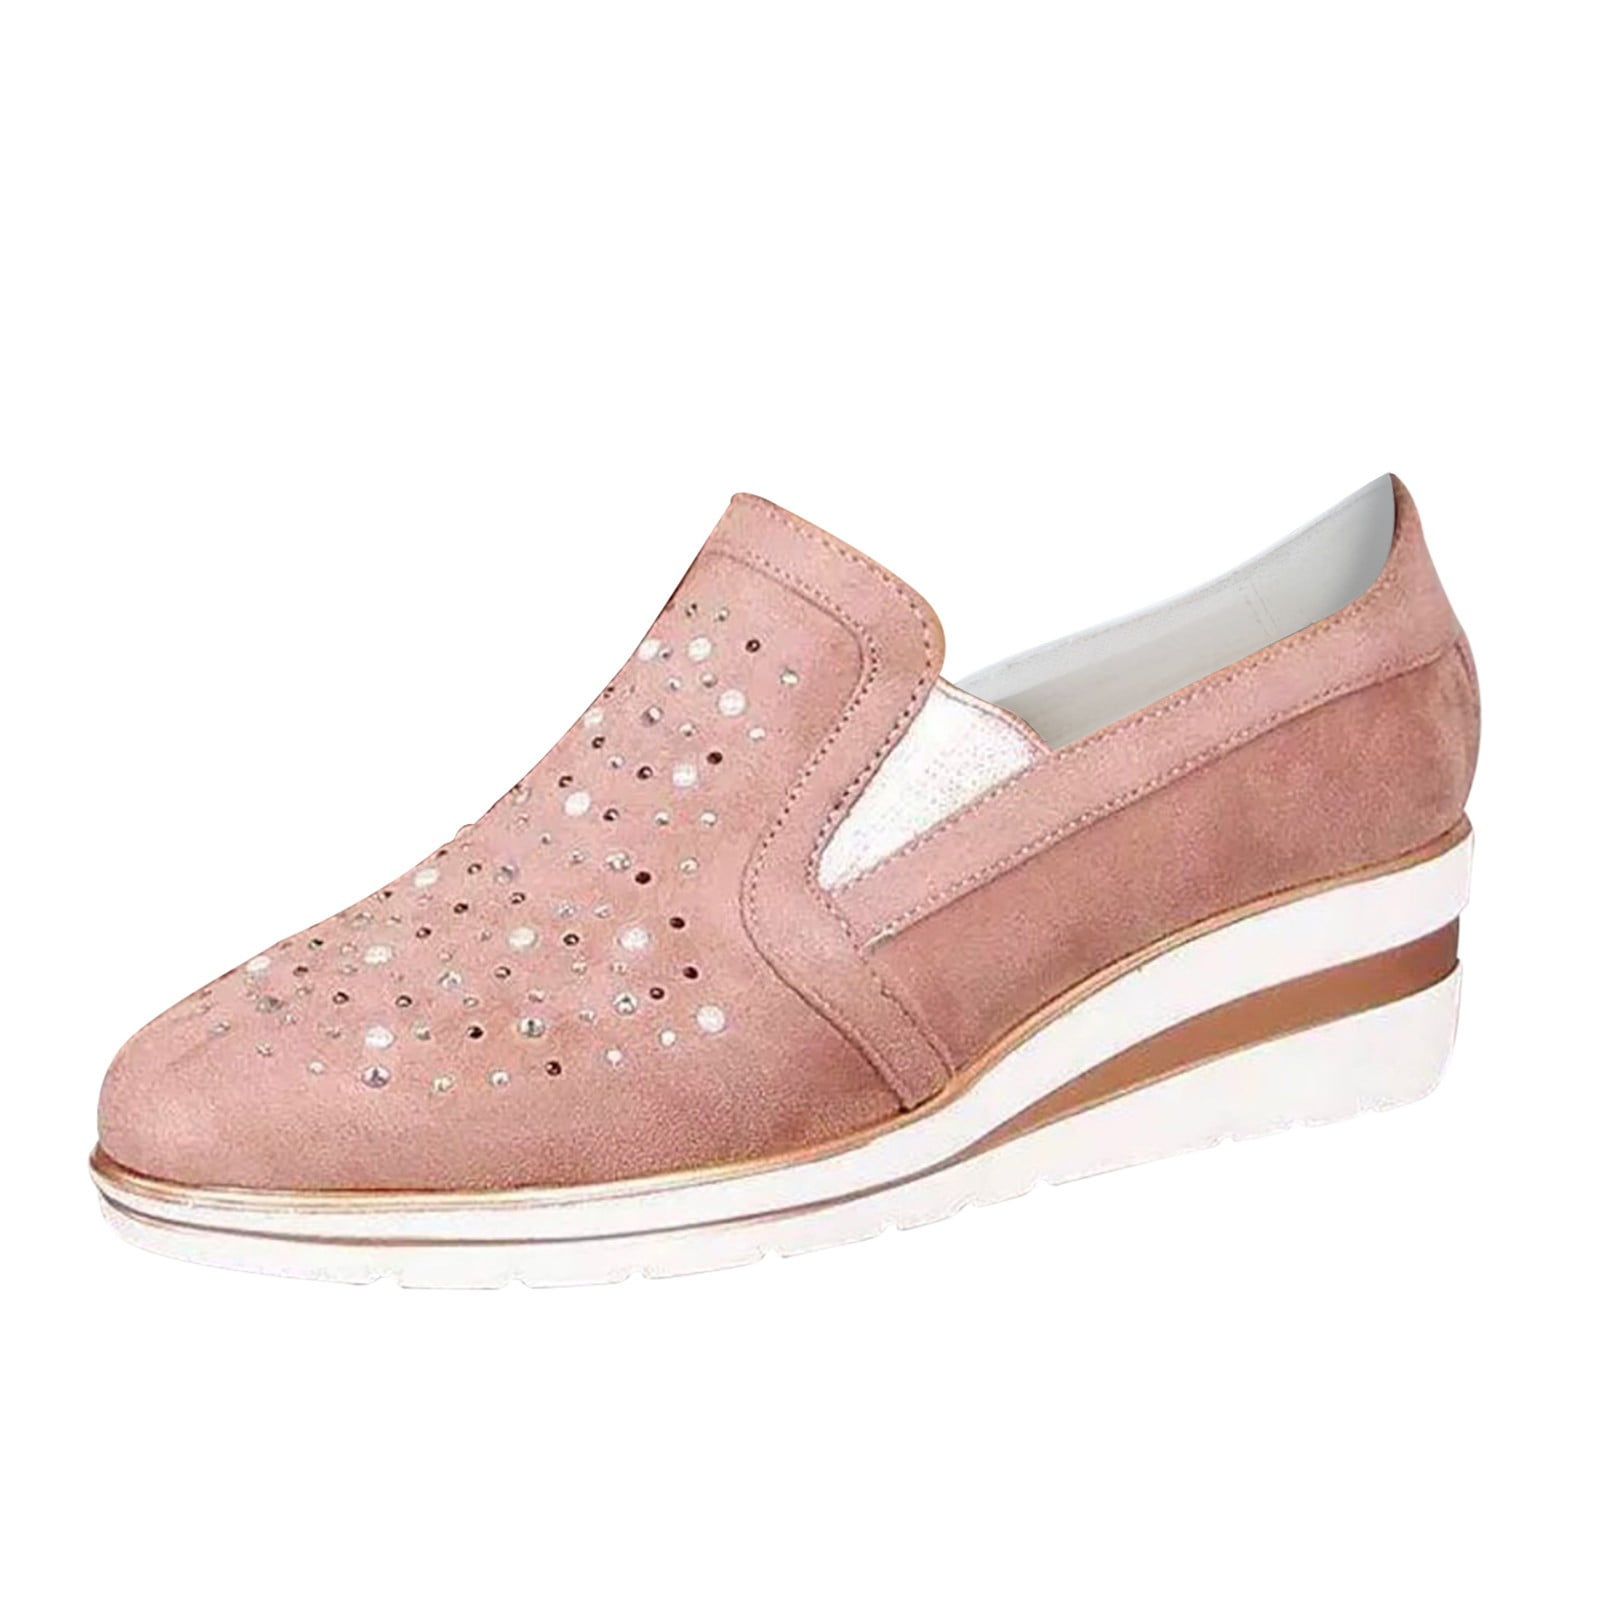 Feversole Women's Fashion Dress Sneakers Party Bling Casual Flats Embellished Shoes Rose Gold Plimsolls Glitter Lace Us6.5/Eu37